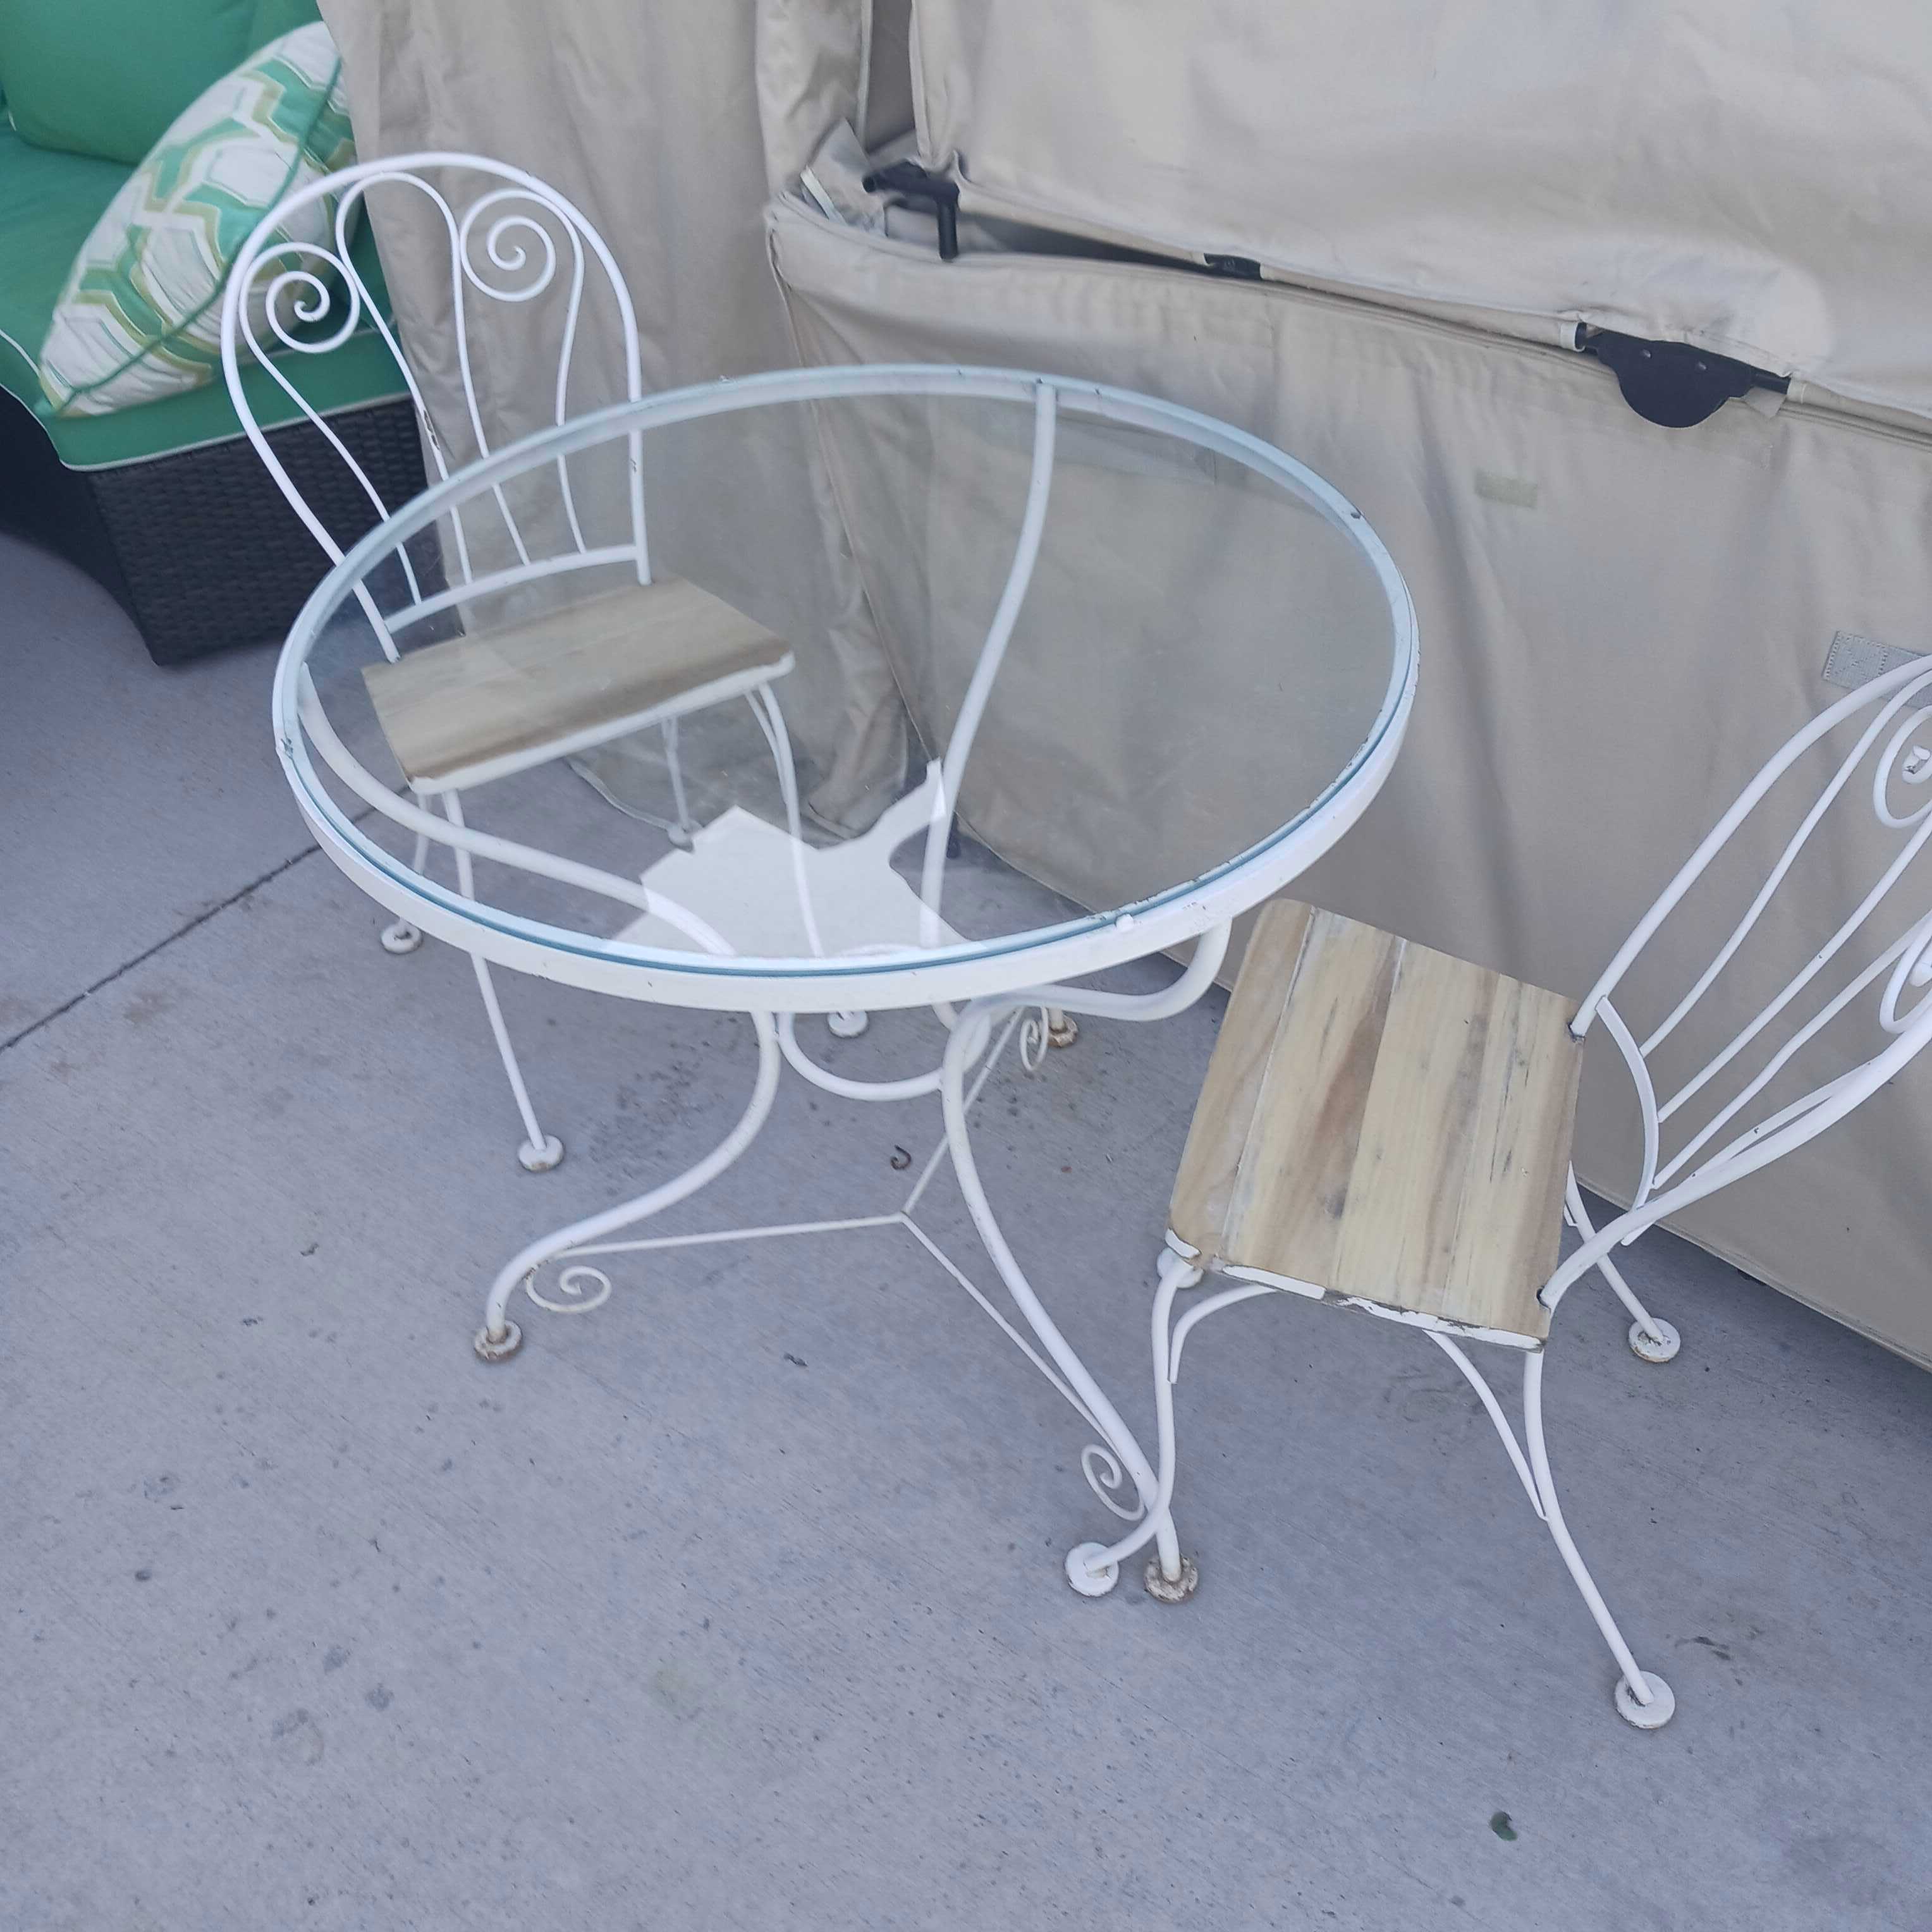 White Metal Glass Top Table with Chairs Patio Set